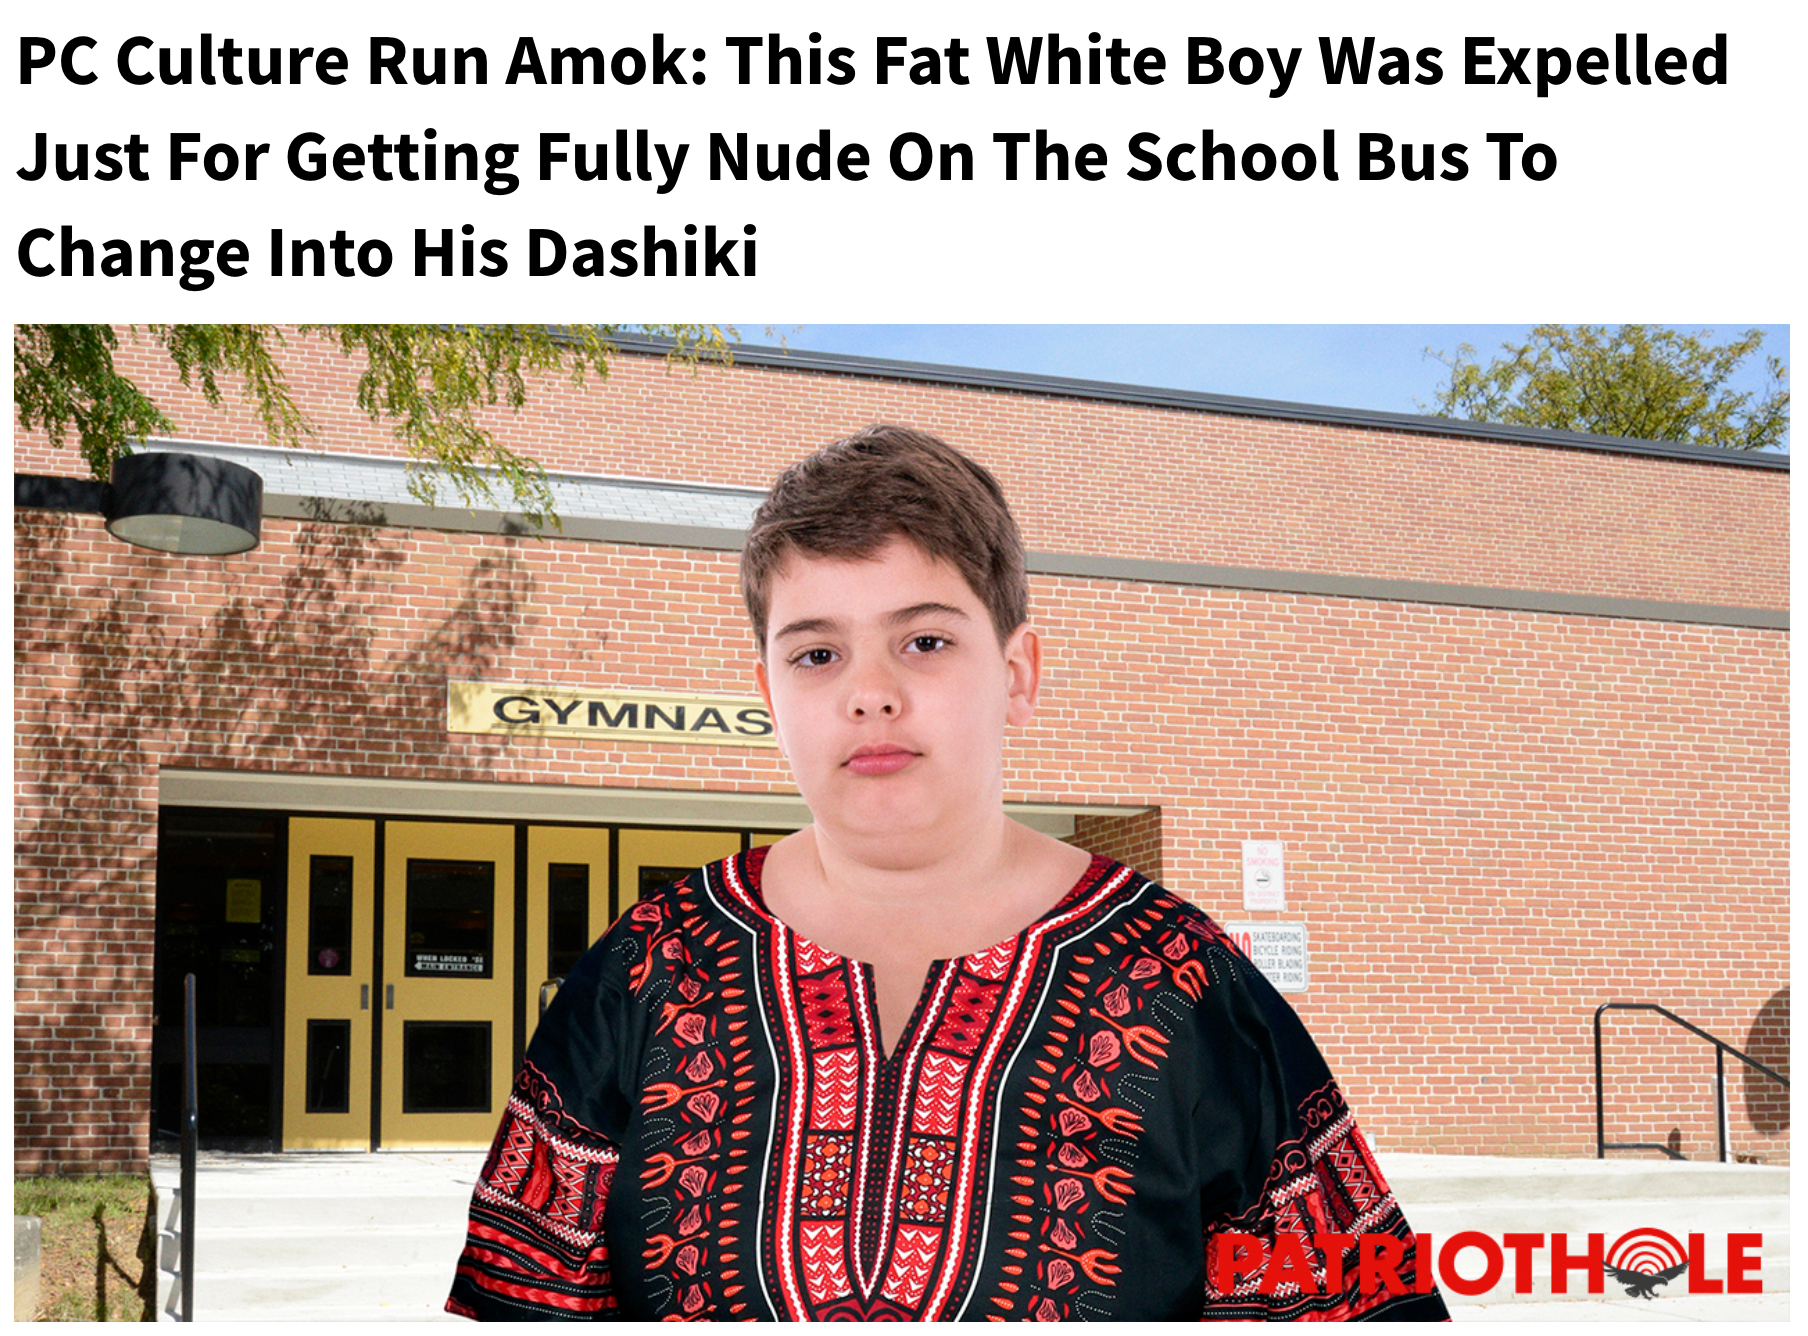 clickhole headlines - Pc Culture Run Amok This Fat White Boy Was Expelled Just For Getting Fully Nude On The School Bus To Change Into His Dashiki